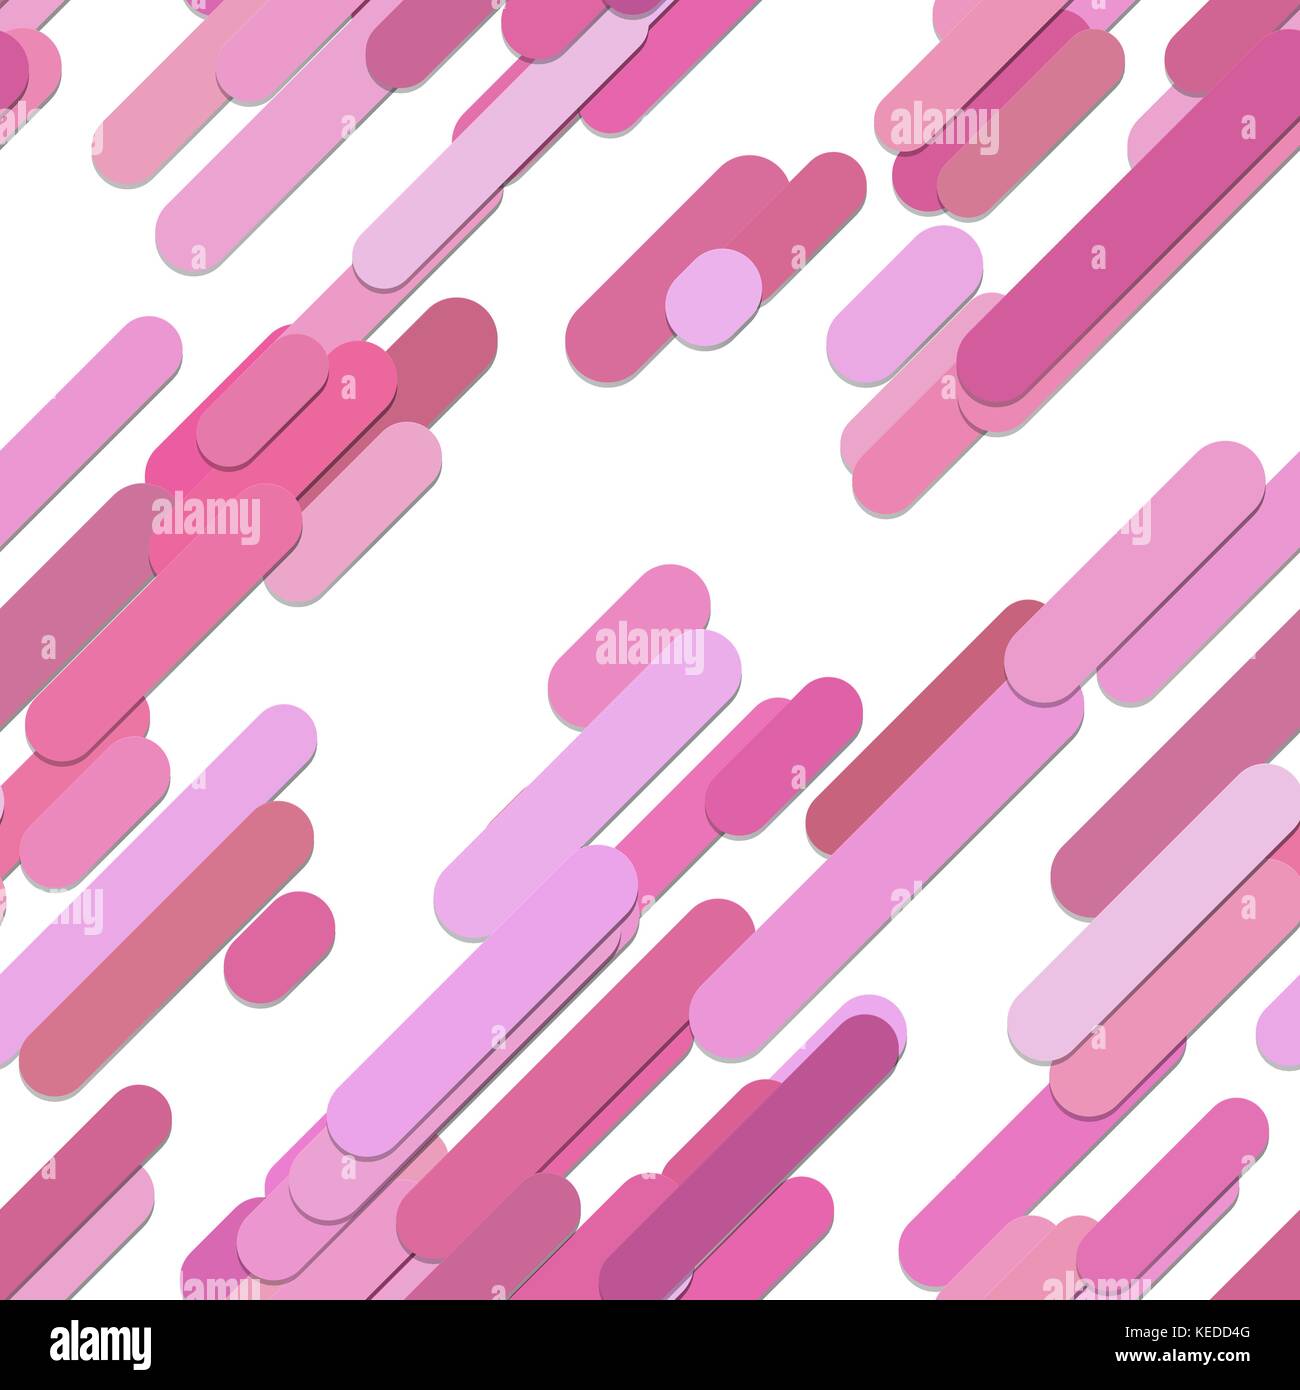 Seamless chaotic rounded diagonal stripe background pattern Stock Vector